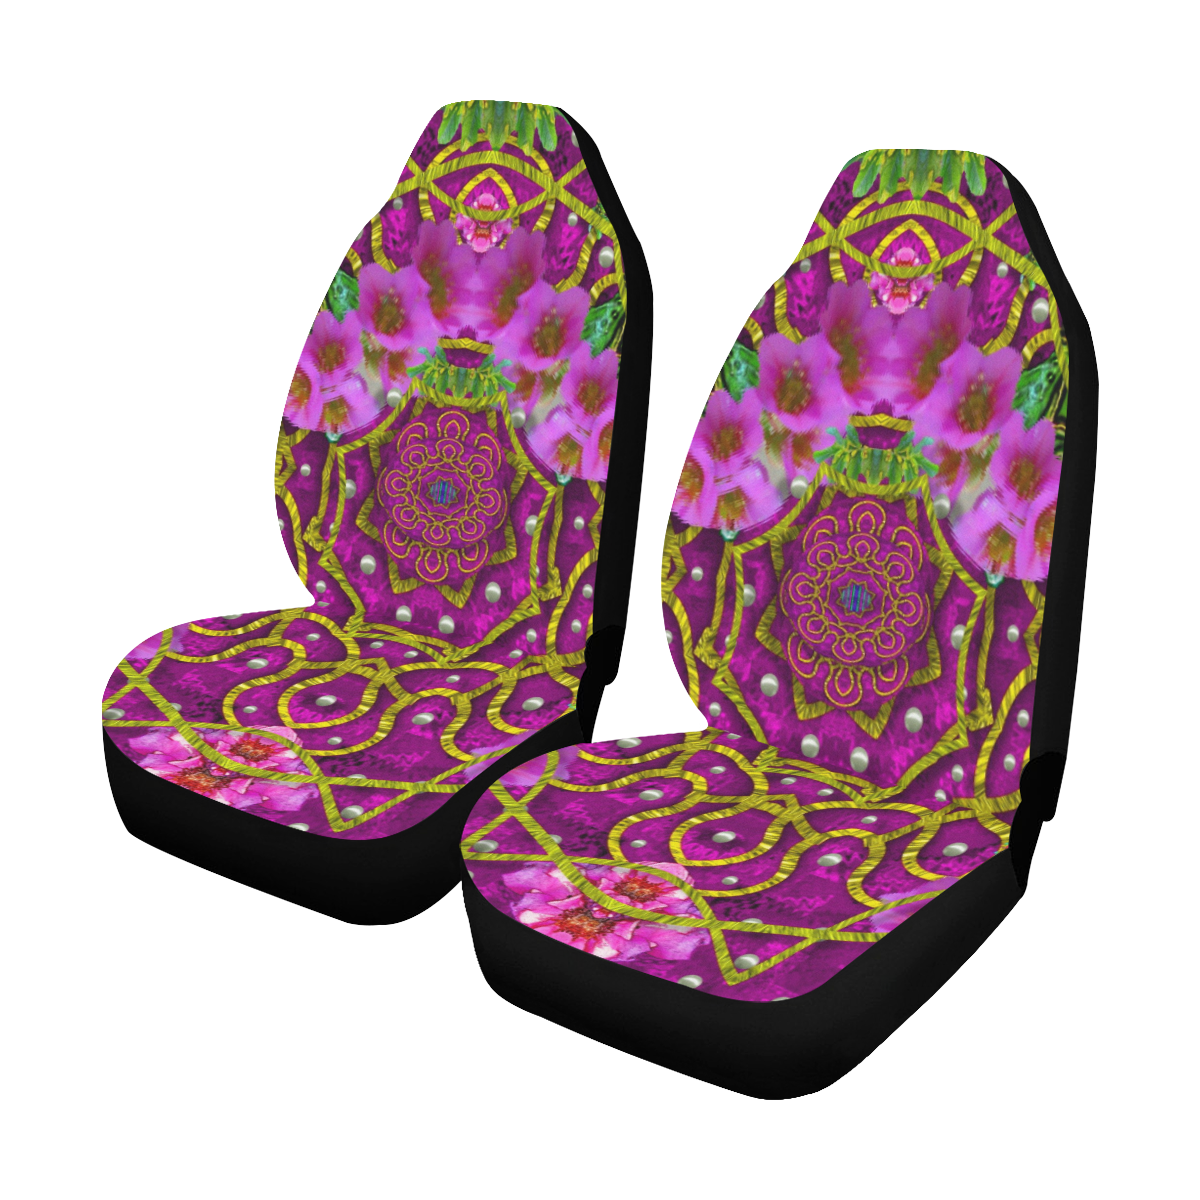 Star of freedom ornate rainfall Car Seat Covers (Set of 2)